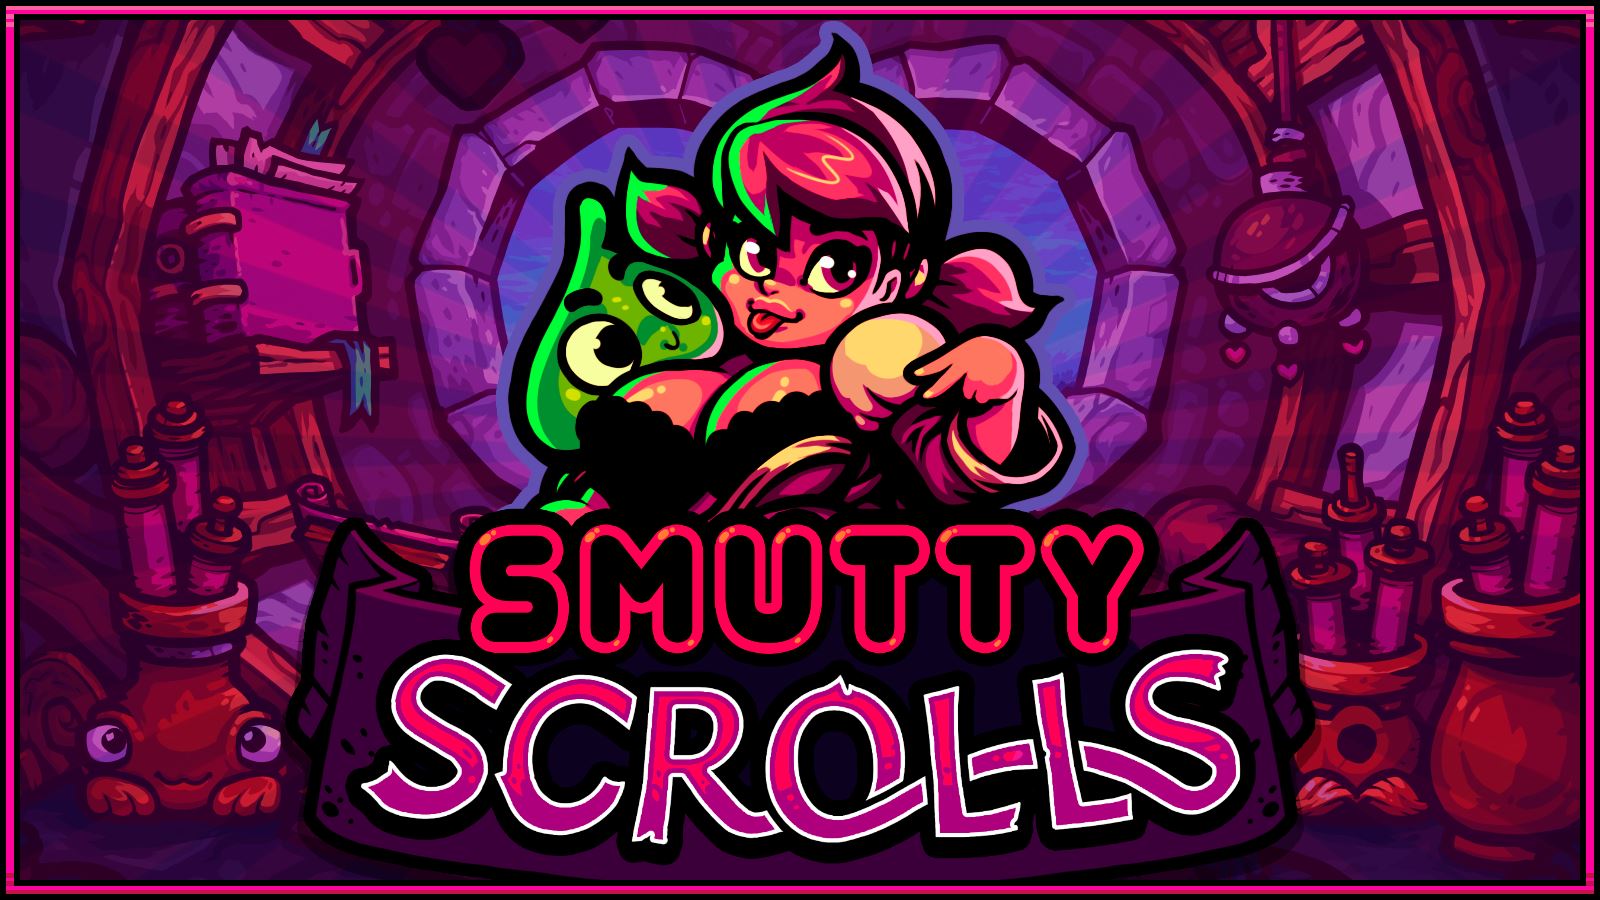 Smutty Scrolls [Ongoing] - Version: Early Access